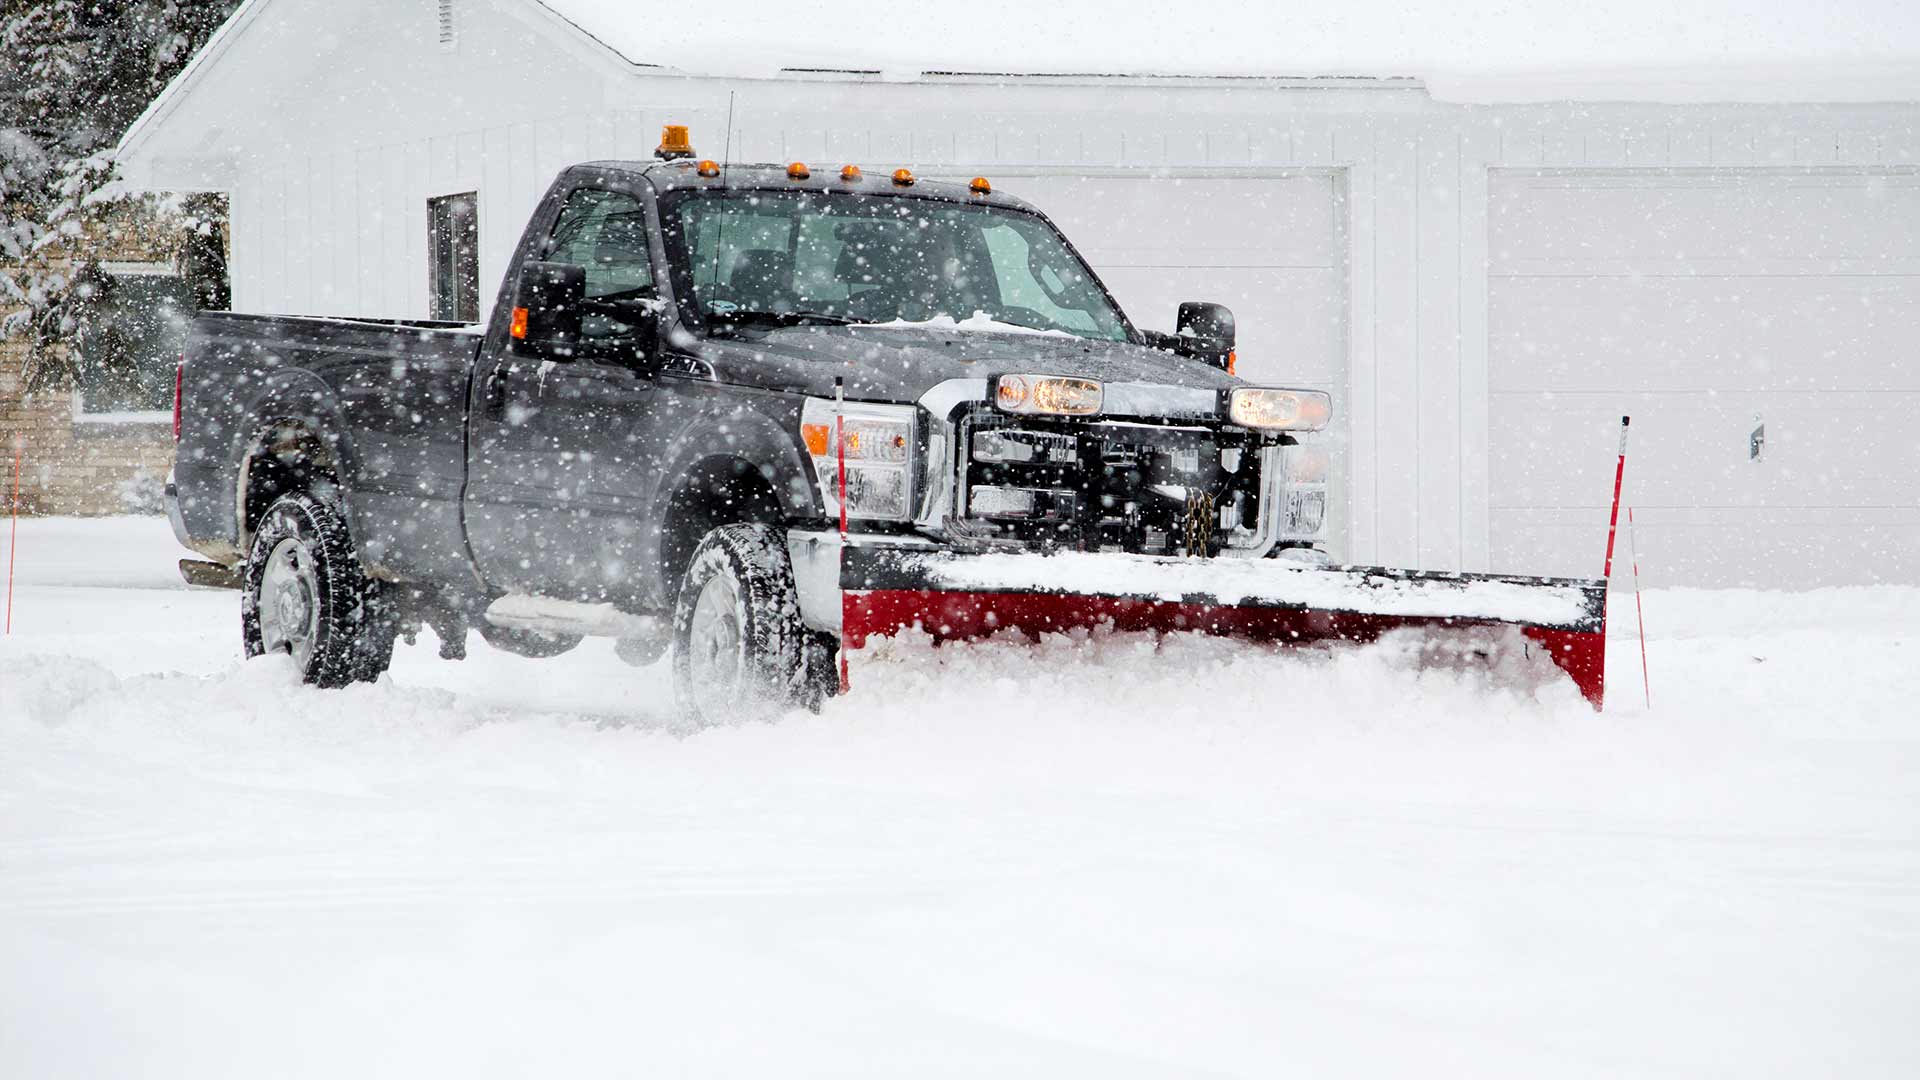 A work truck with a snow plow attachment near Edwardsville, IL.